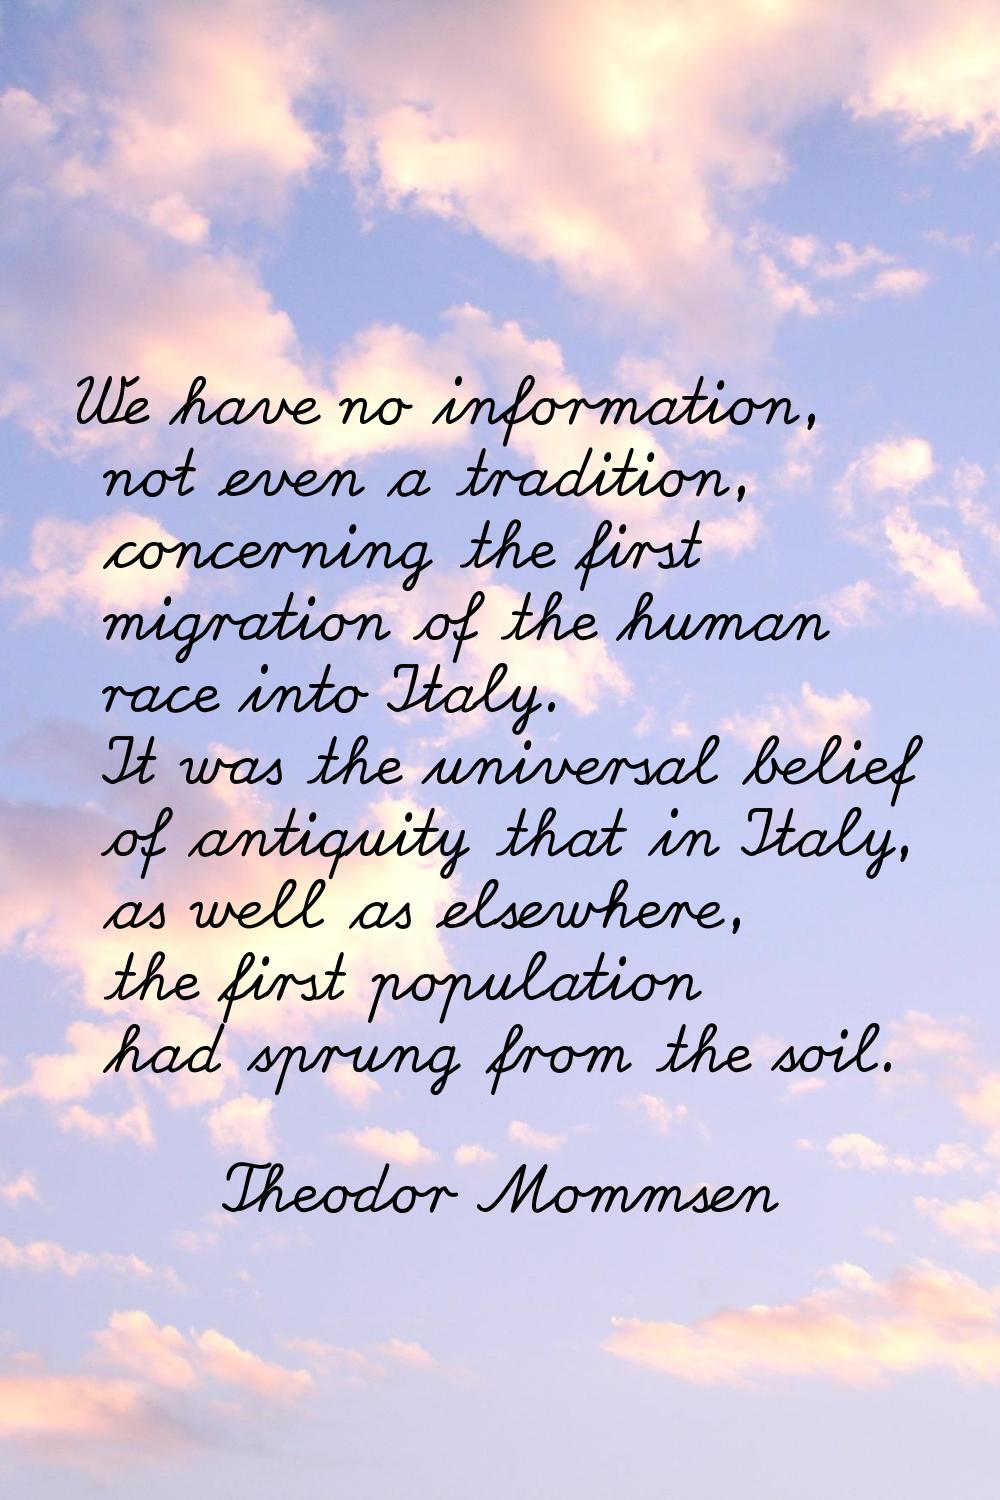 We have no information, not even a tradition, concerning the first migration of the human race into